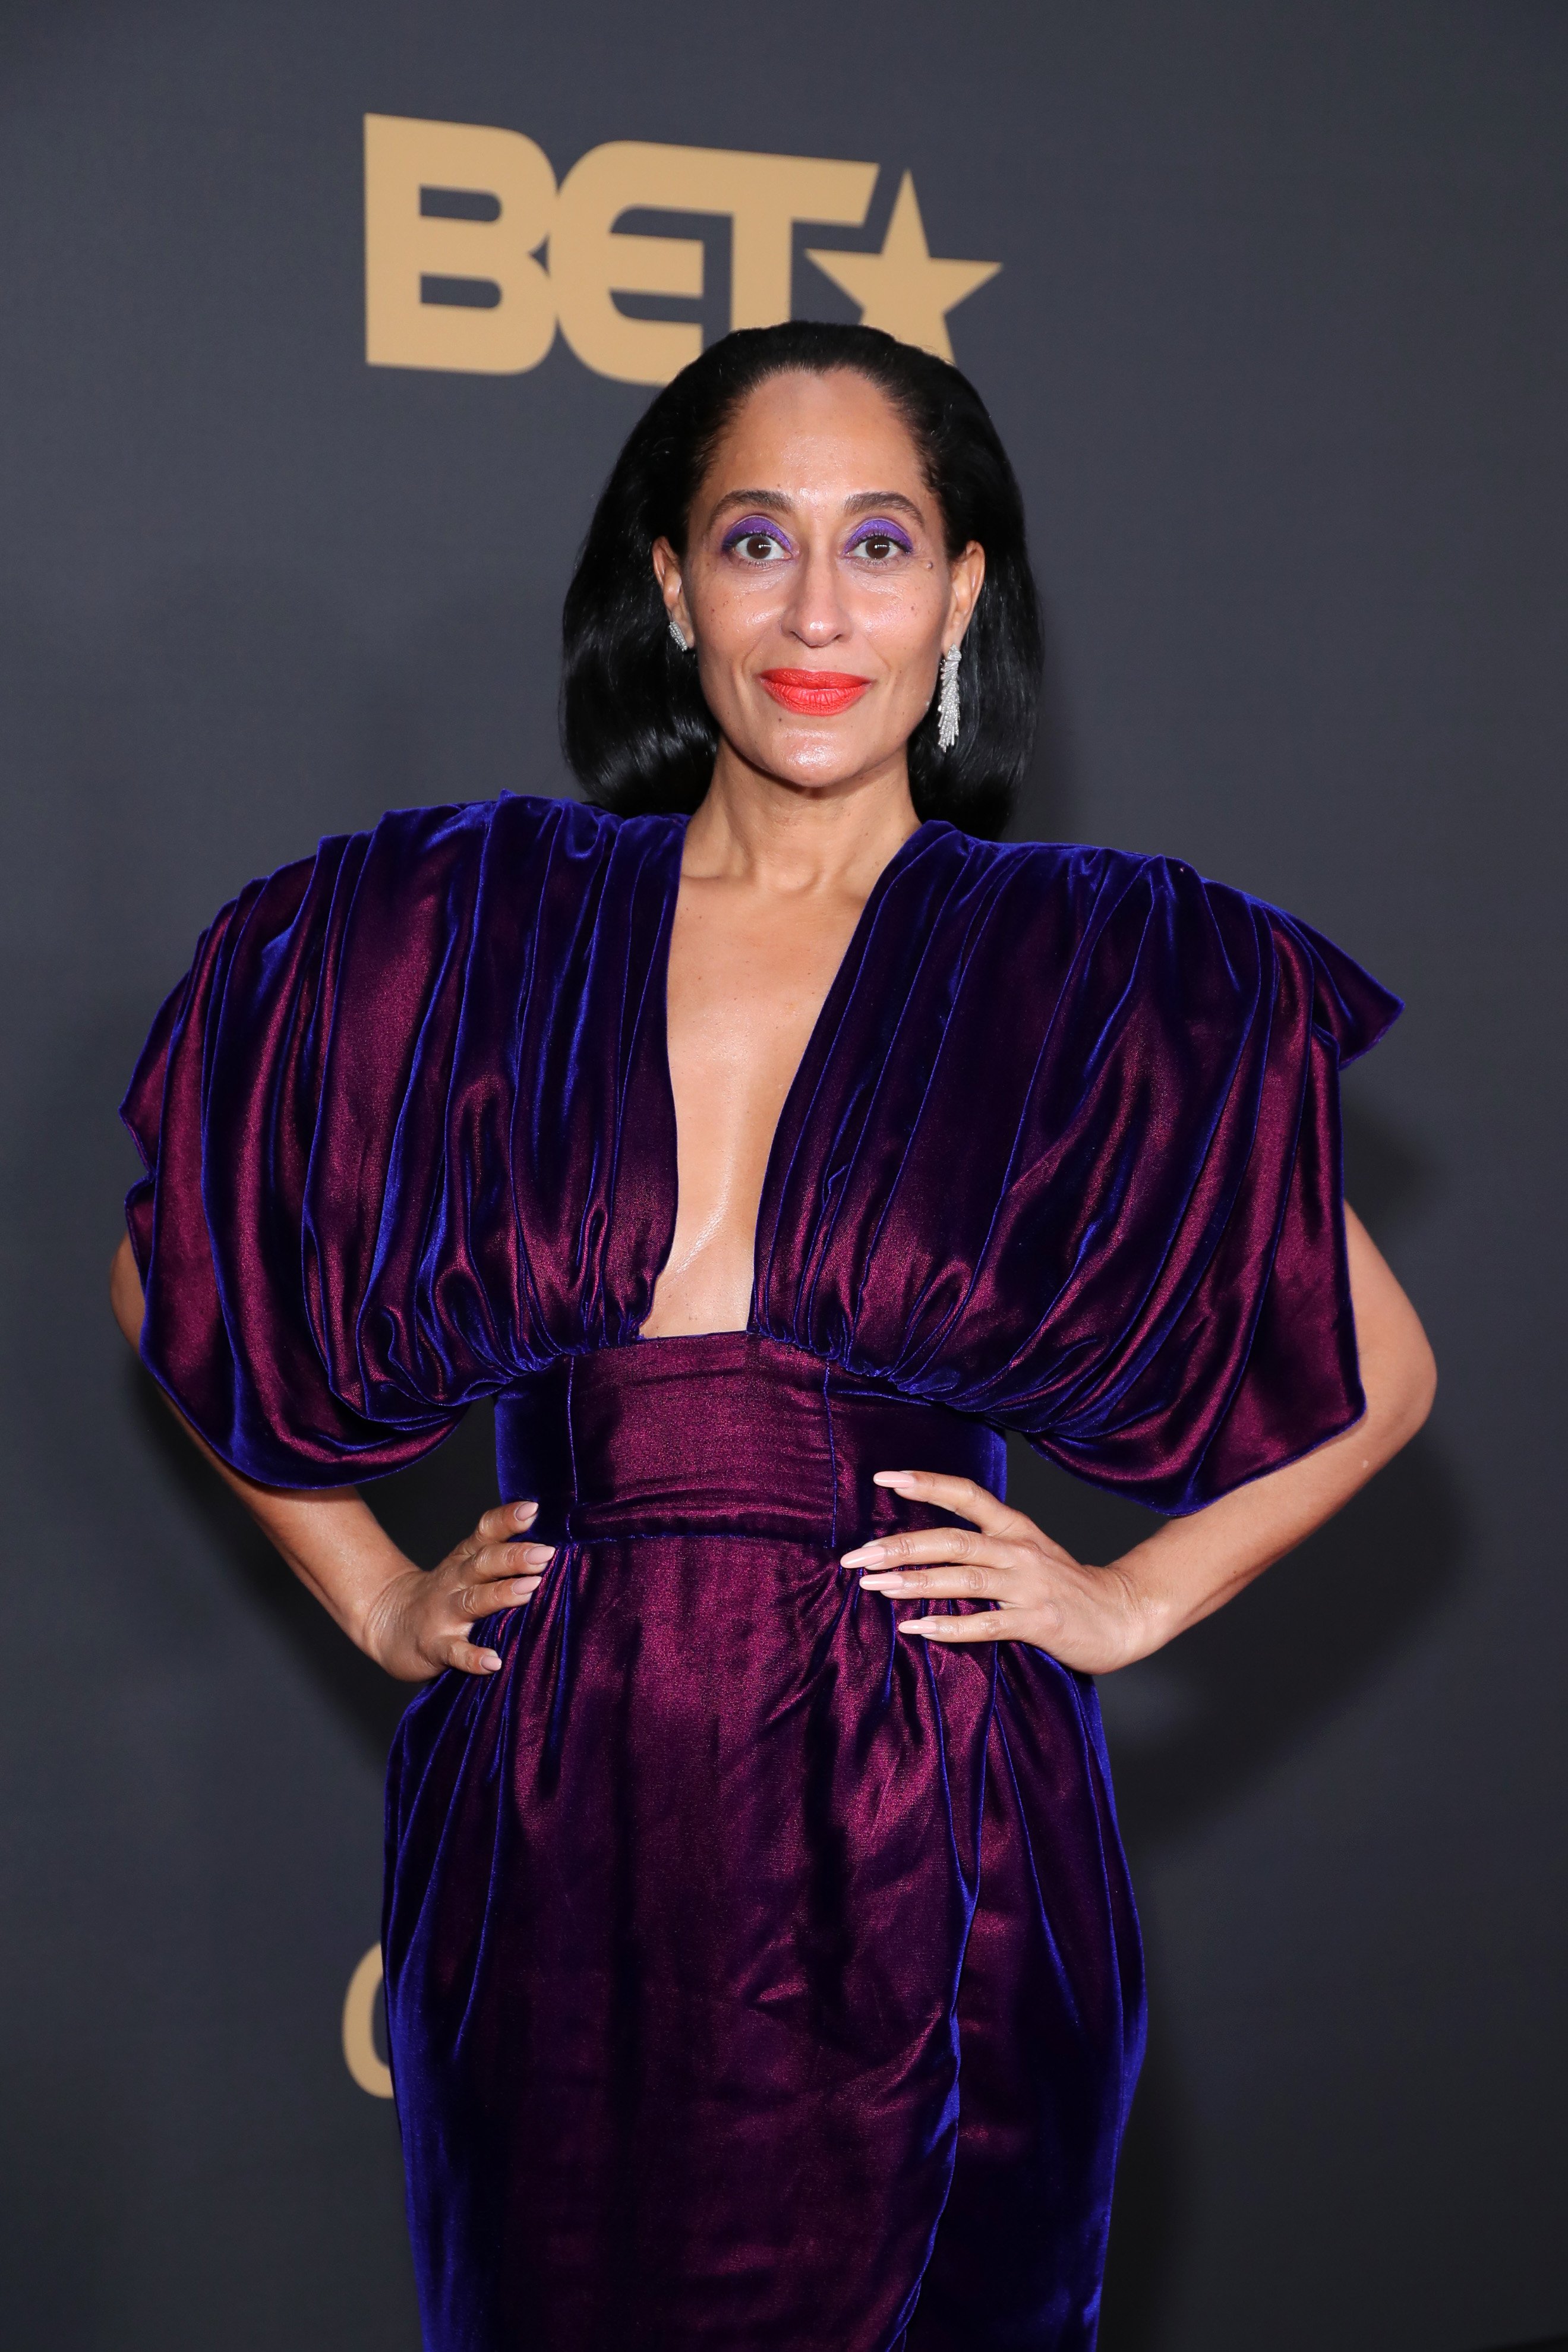 Tracee Ellis Ross arrives at the 51st NAACP Image Awards presented by BET on February 22, 2020 in Pasadena, California. | Photo: Getty Images